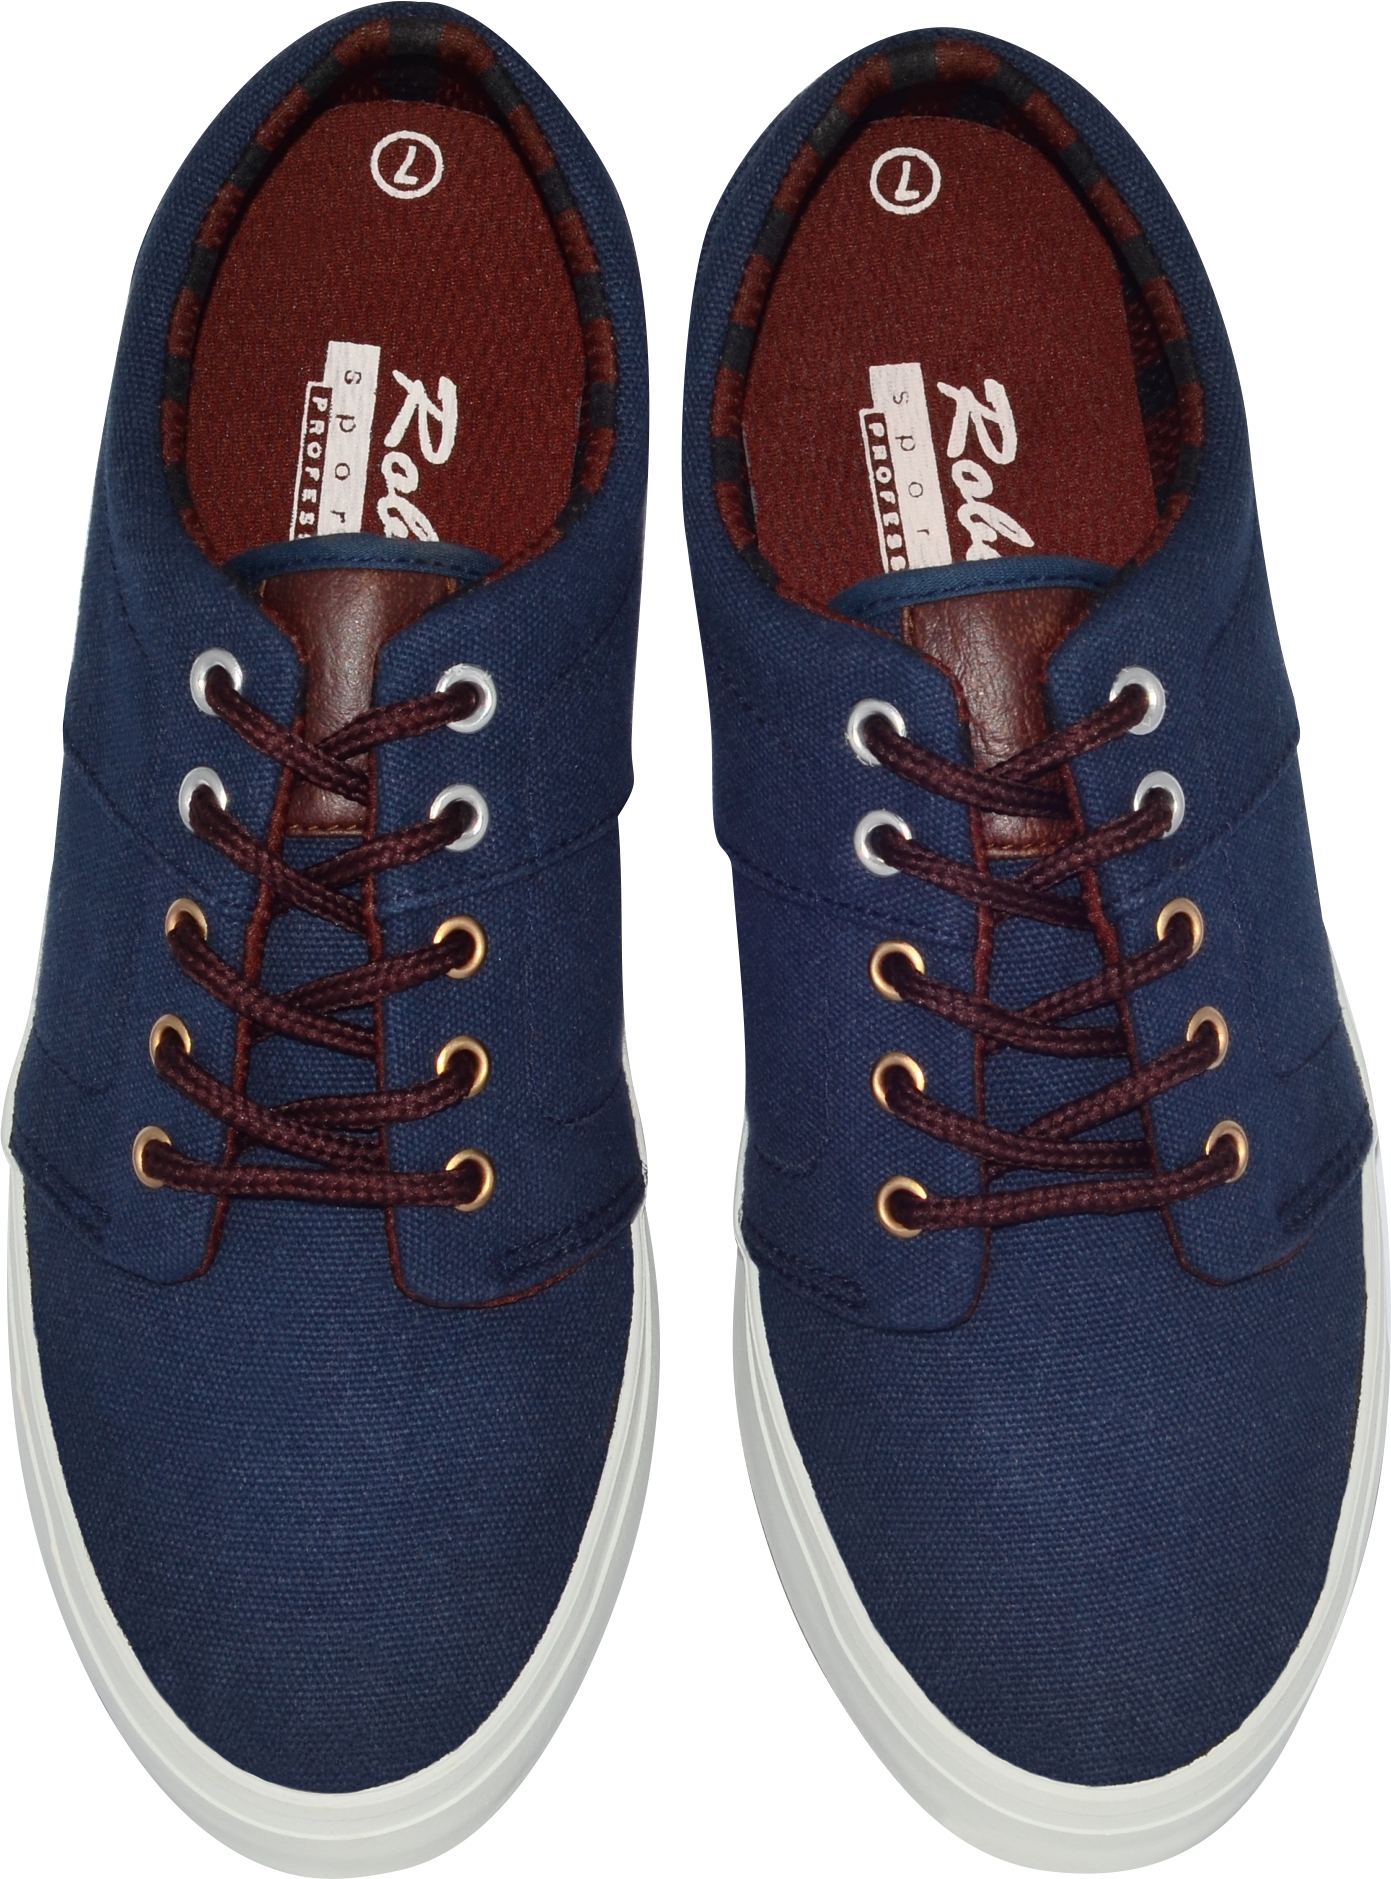 Robertsons Shoes Caiden Navy: Buy sell 